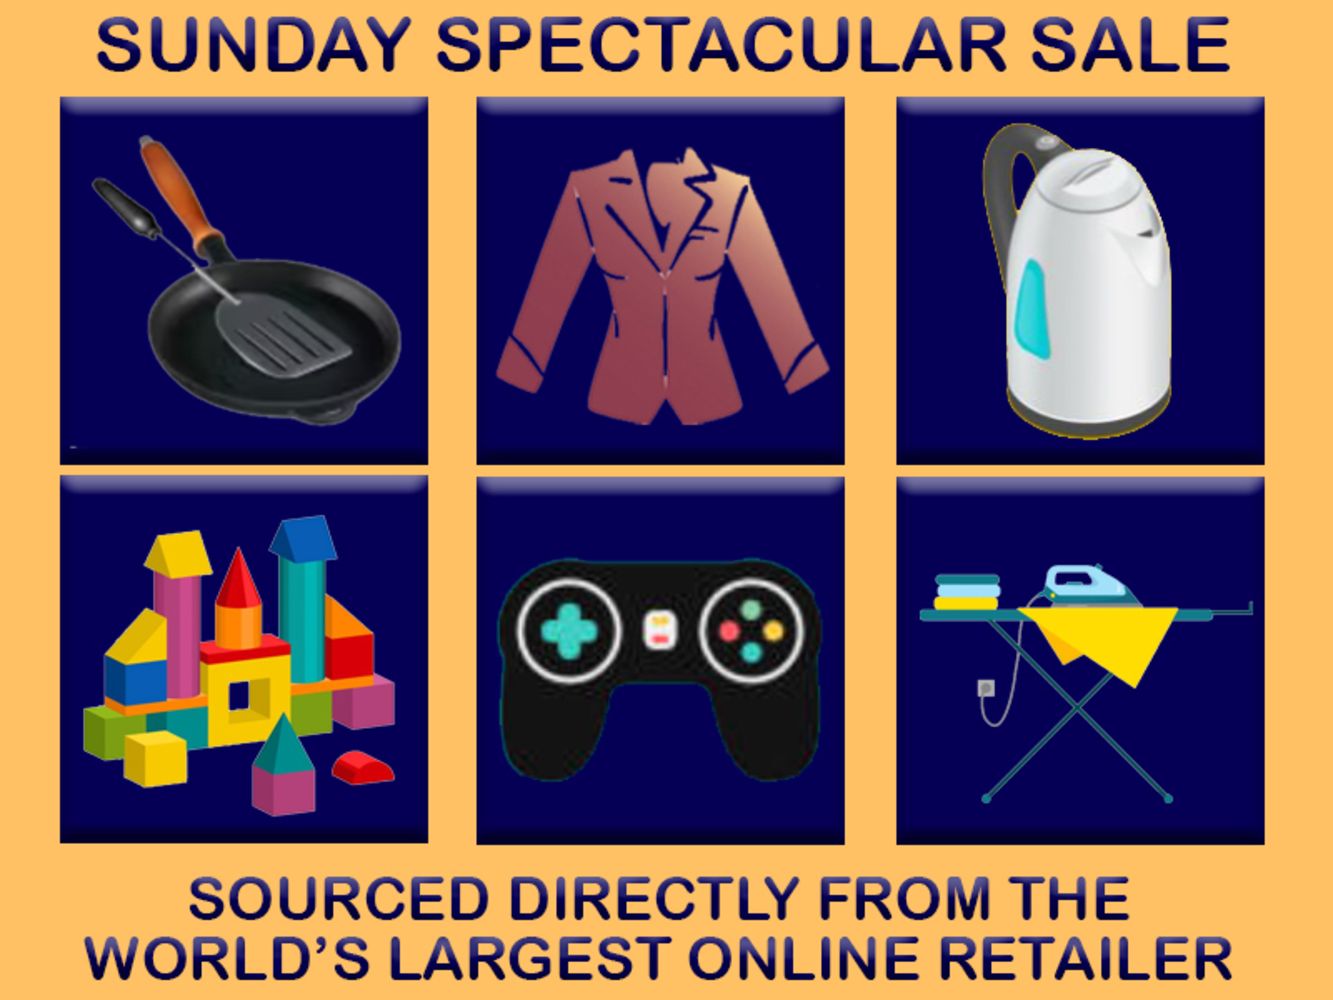 TIMED - Sunday Spectacular Sale: Brand-New Stock 21st August 2022